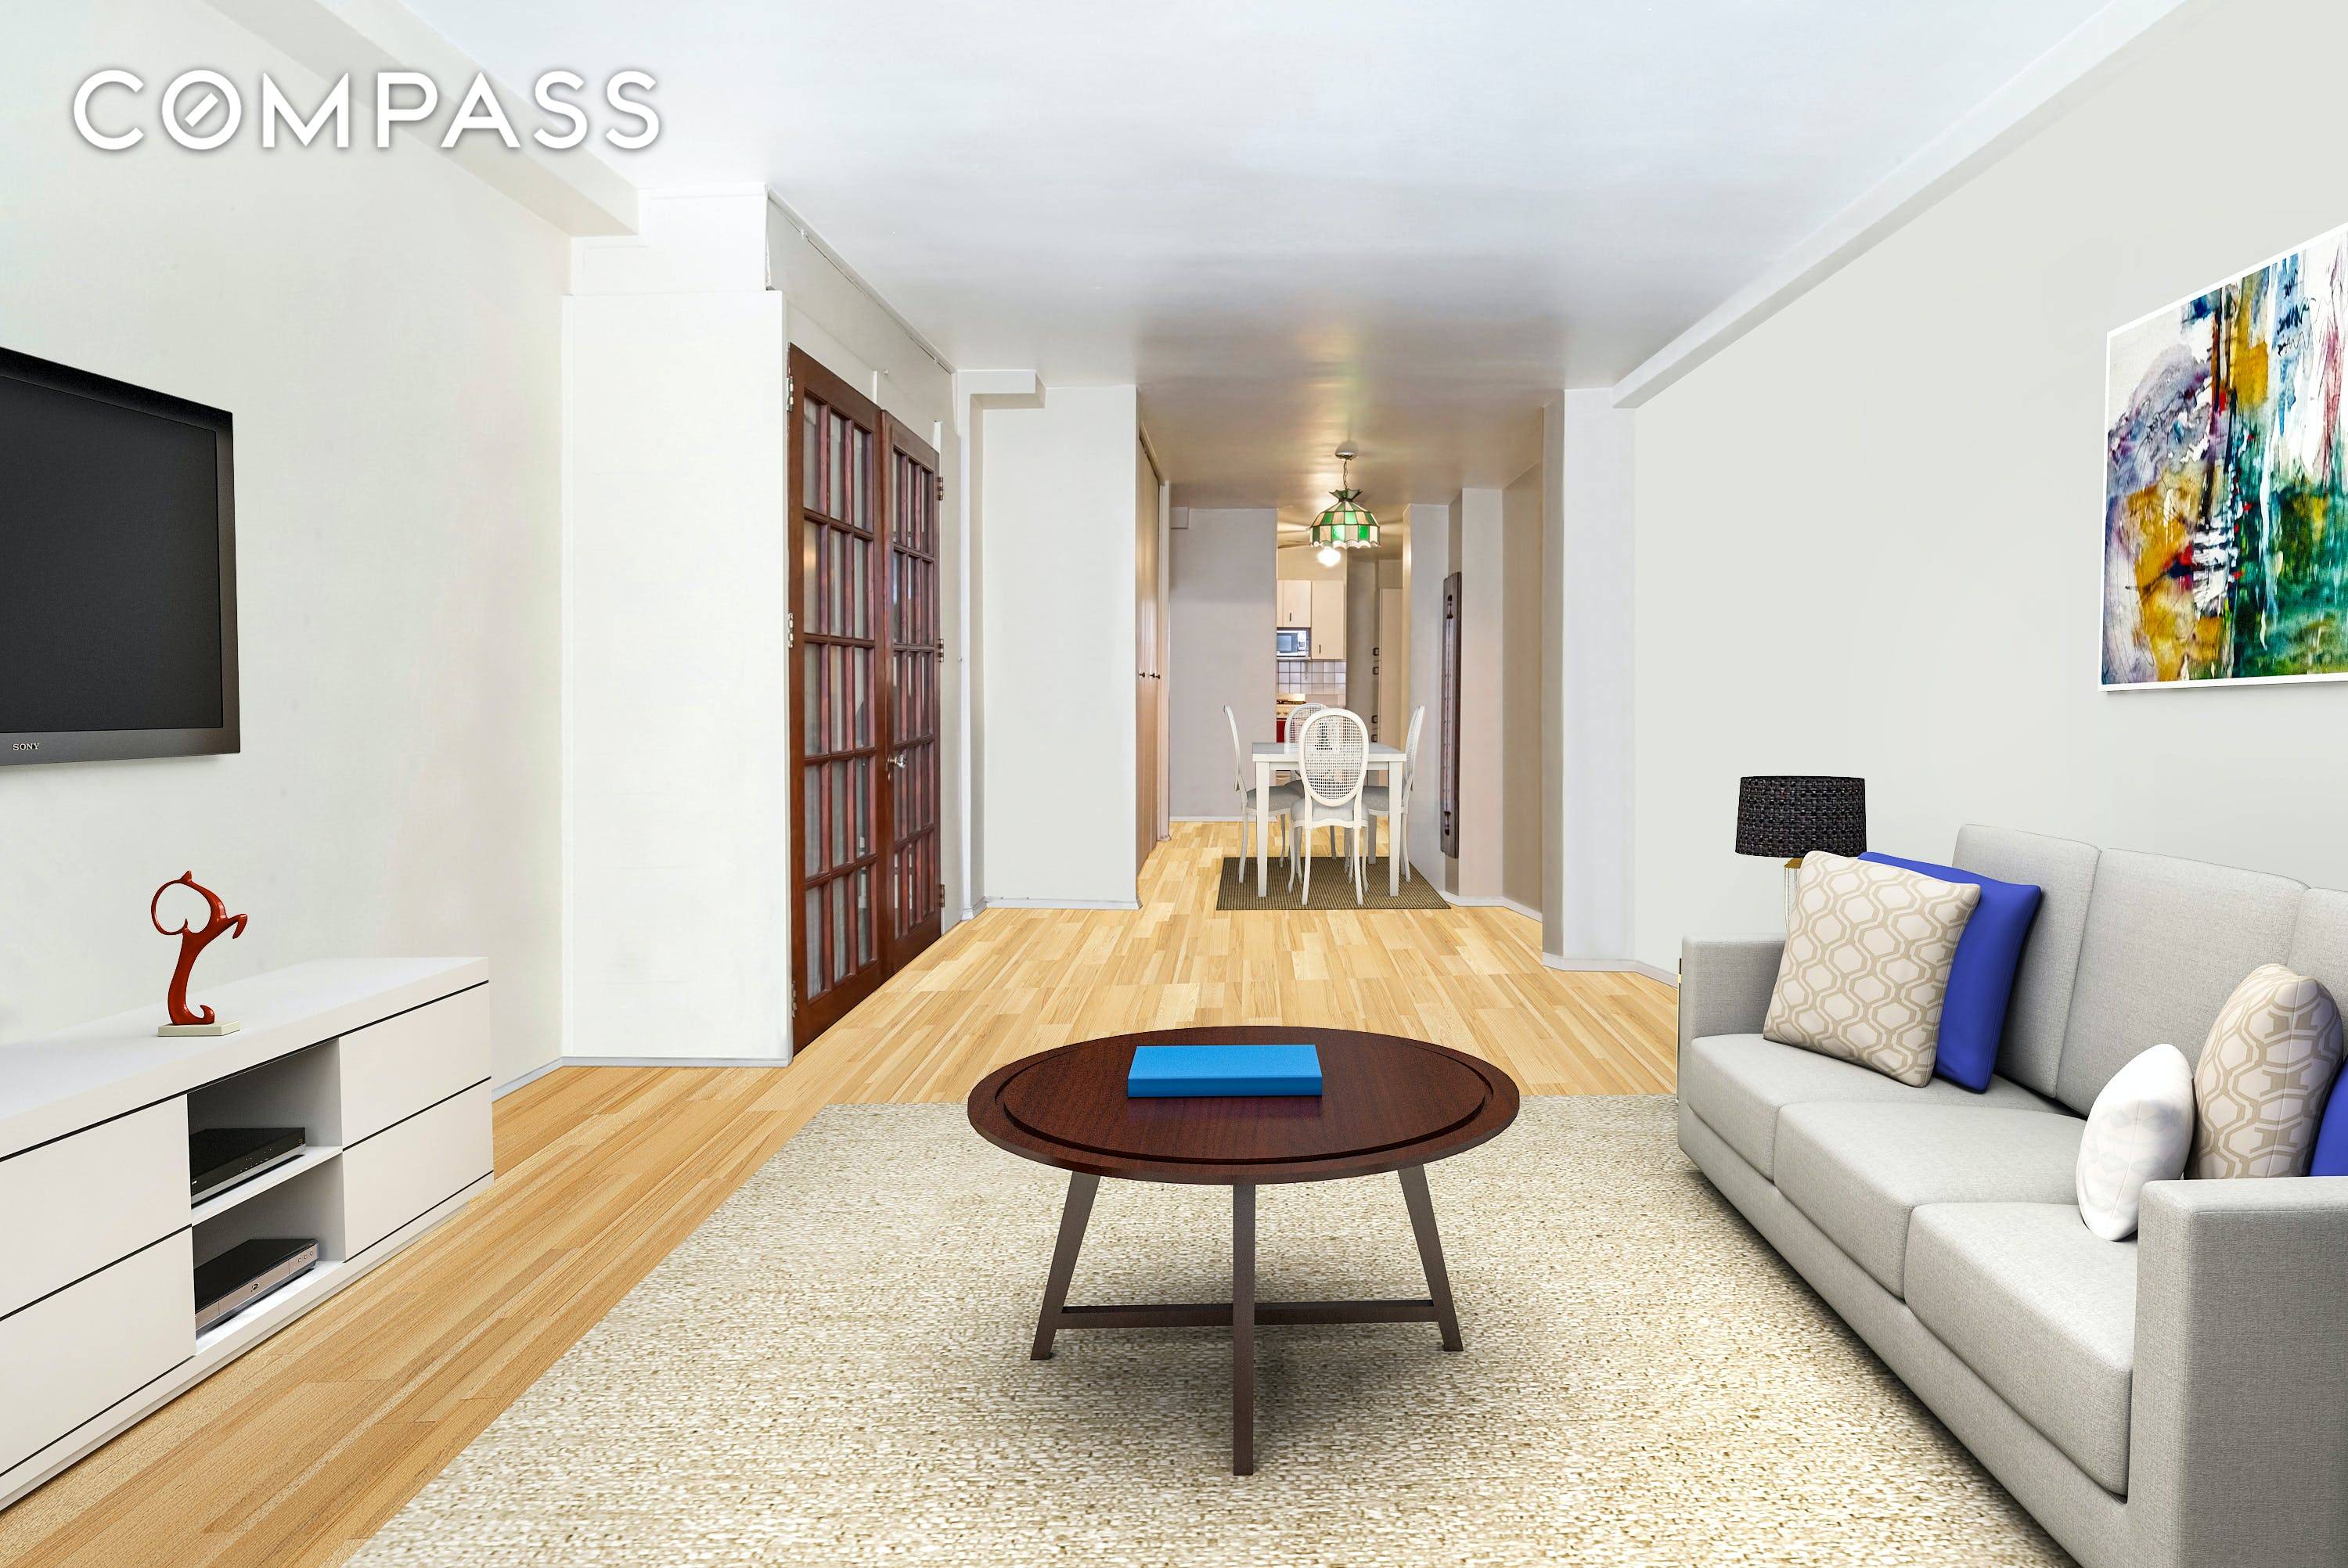 To give the consumer vision as to what the space transforms into, the first five pictures are virtually staged, and are directly followed by current pictures of the apartment.